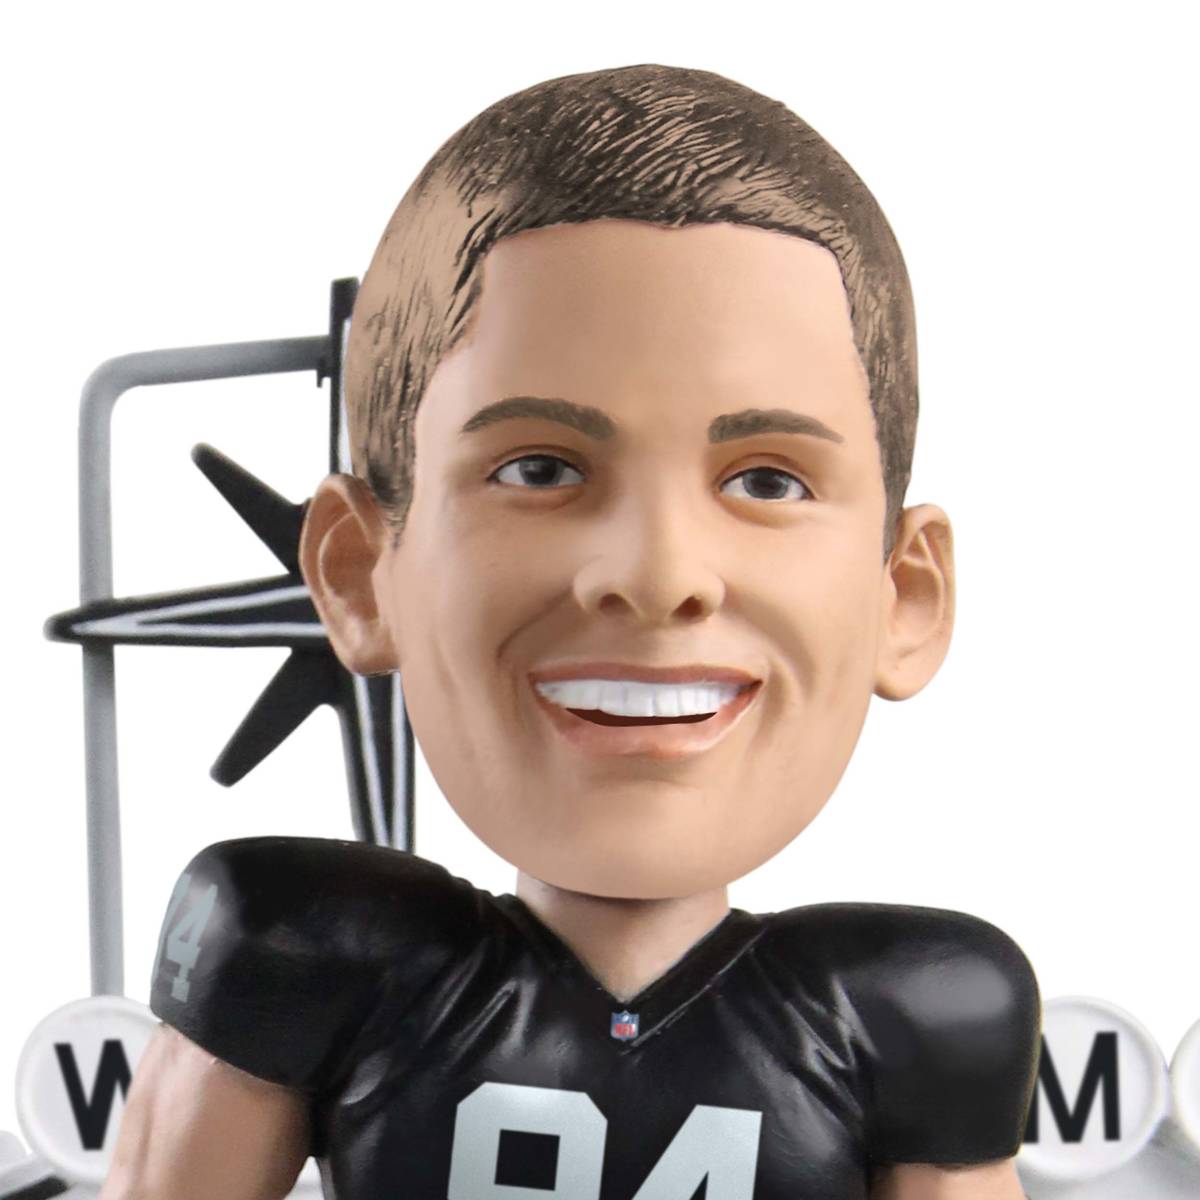 FOCO unveiled a new bobblehead Friday featuring the Raiders' defensive end in his gameday best ...